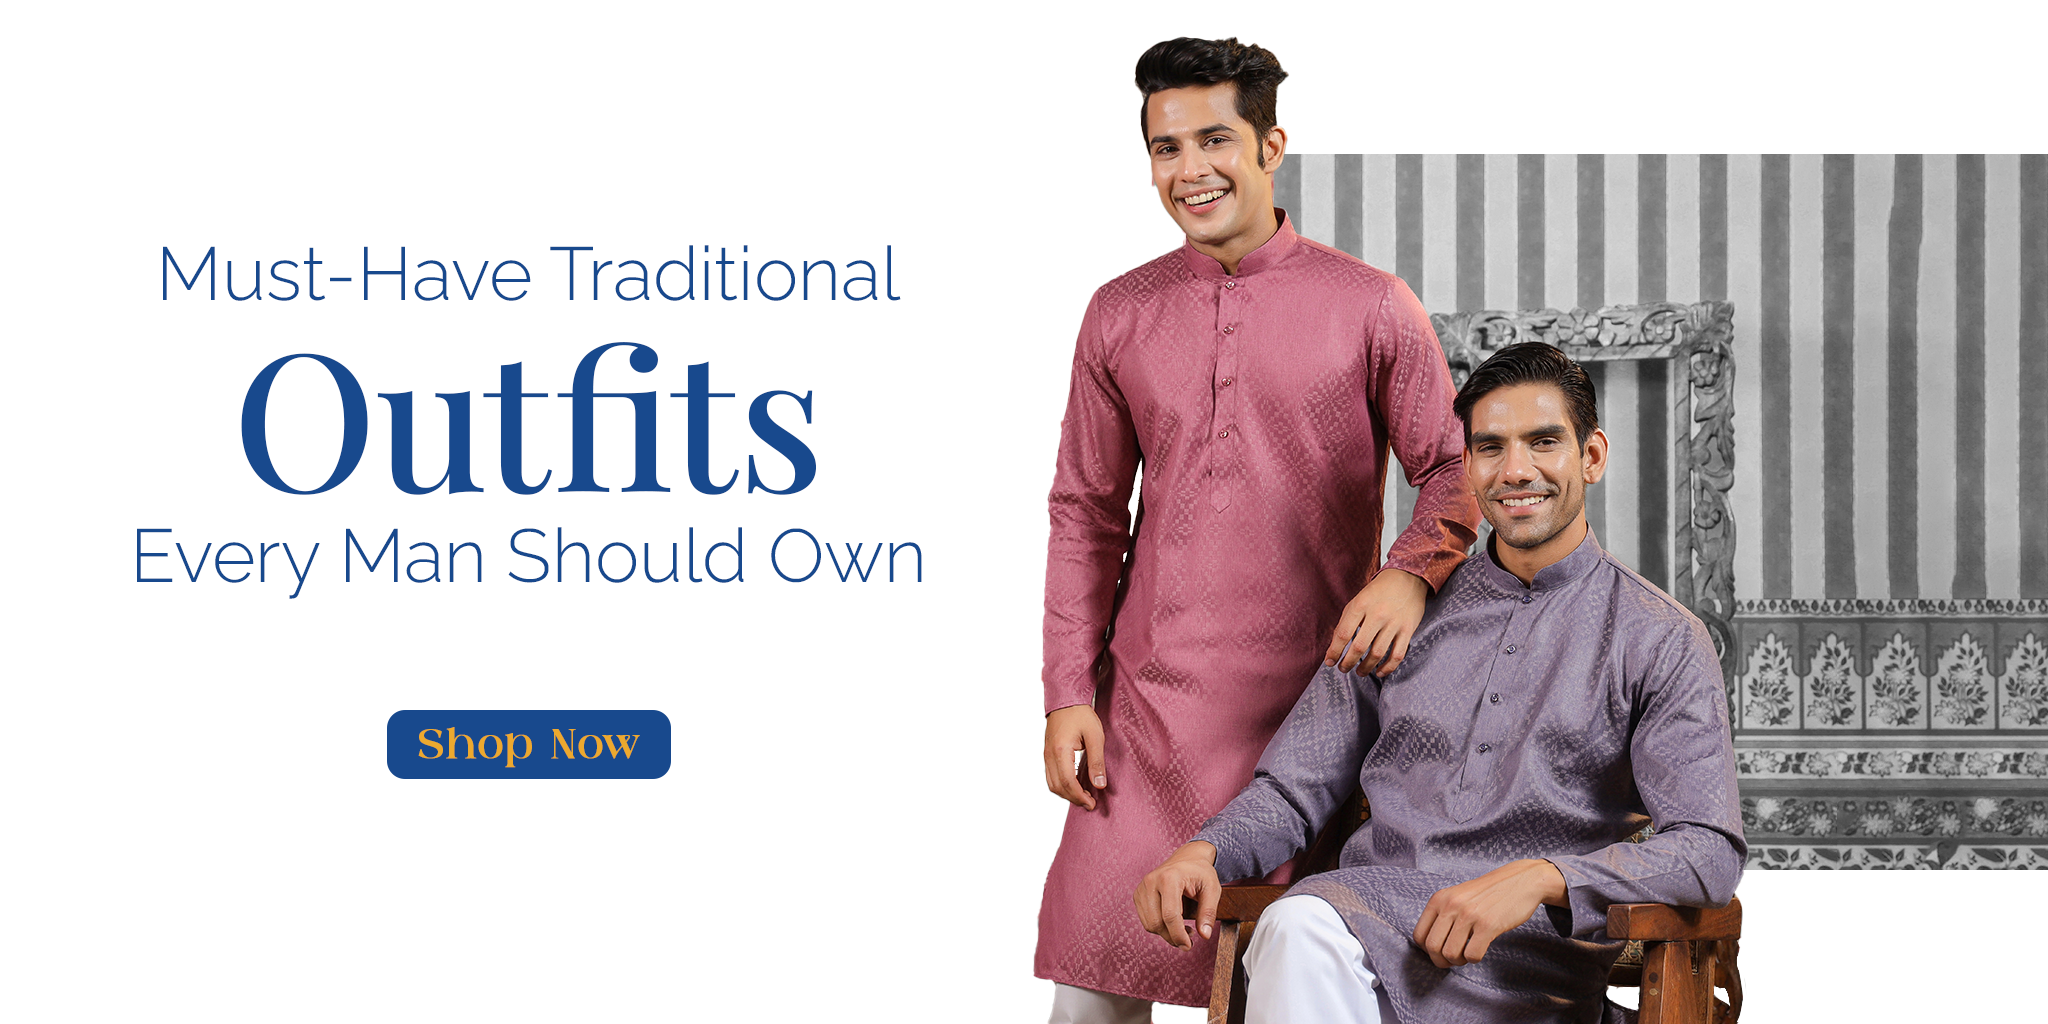 Must-Have Traditional Outfits Every Man Should Own